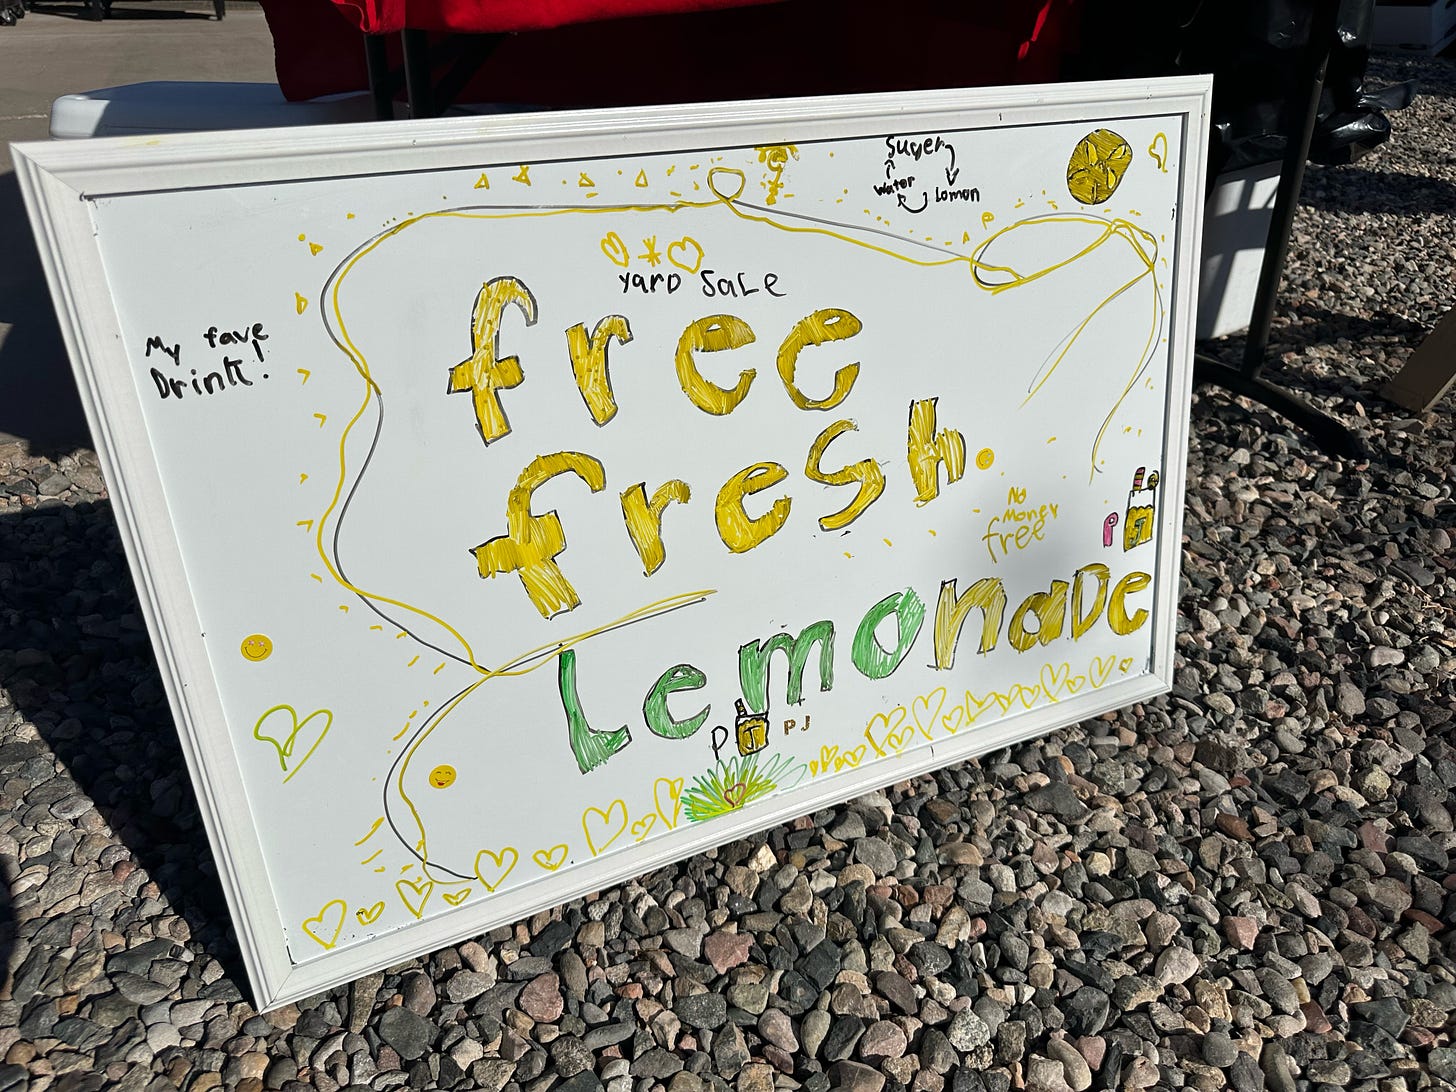 A Libraries and Lemonade sign in front of a stand on a pebbled front yard. It's a white board with hand drawn artwork and the words "Free, fresh, lemonade", "no money free", "my fave drink!" and a diagram showing the relationship between the ingredients (sugar, lemon, and water).